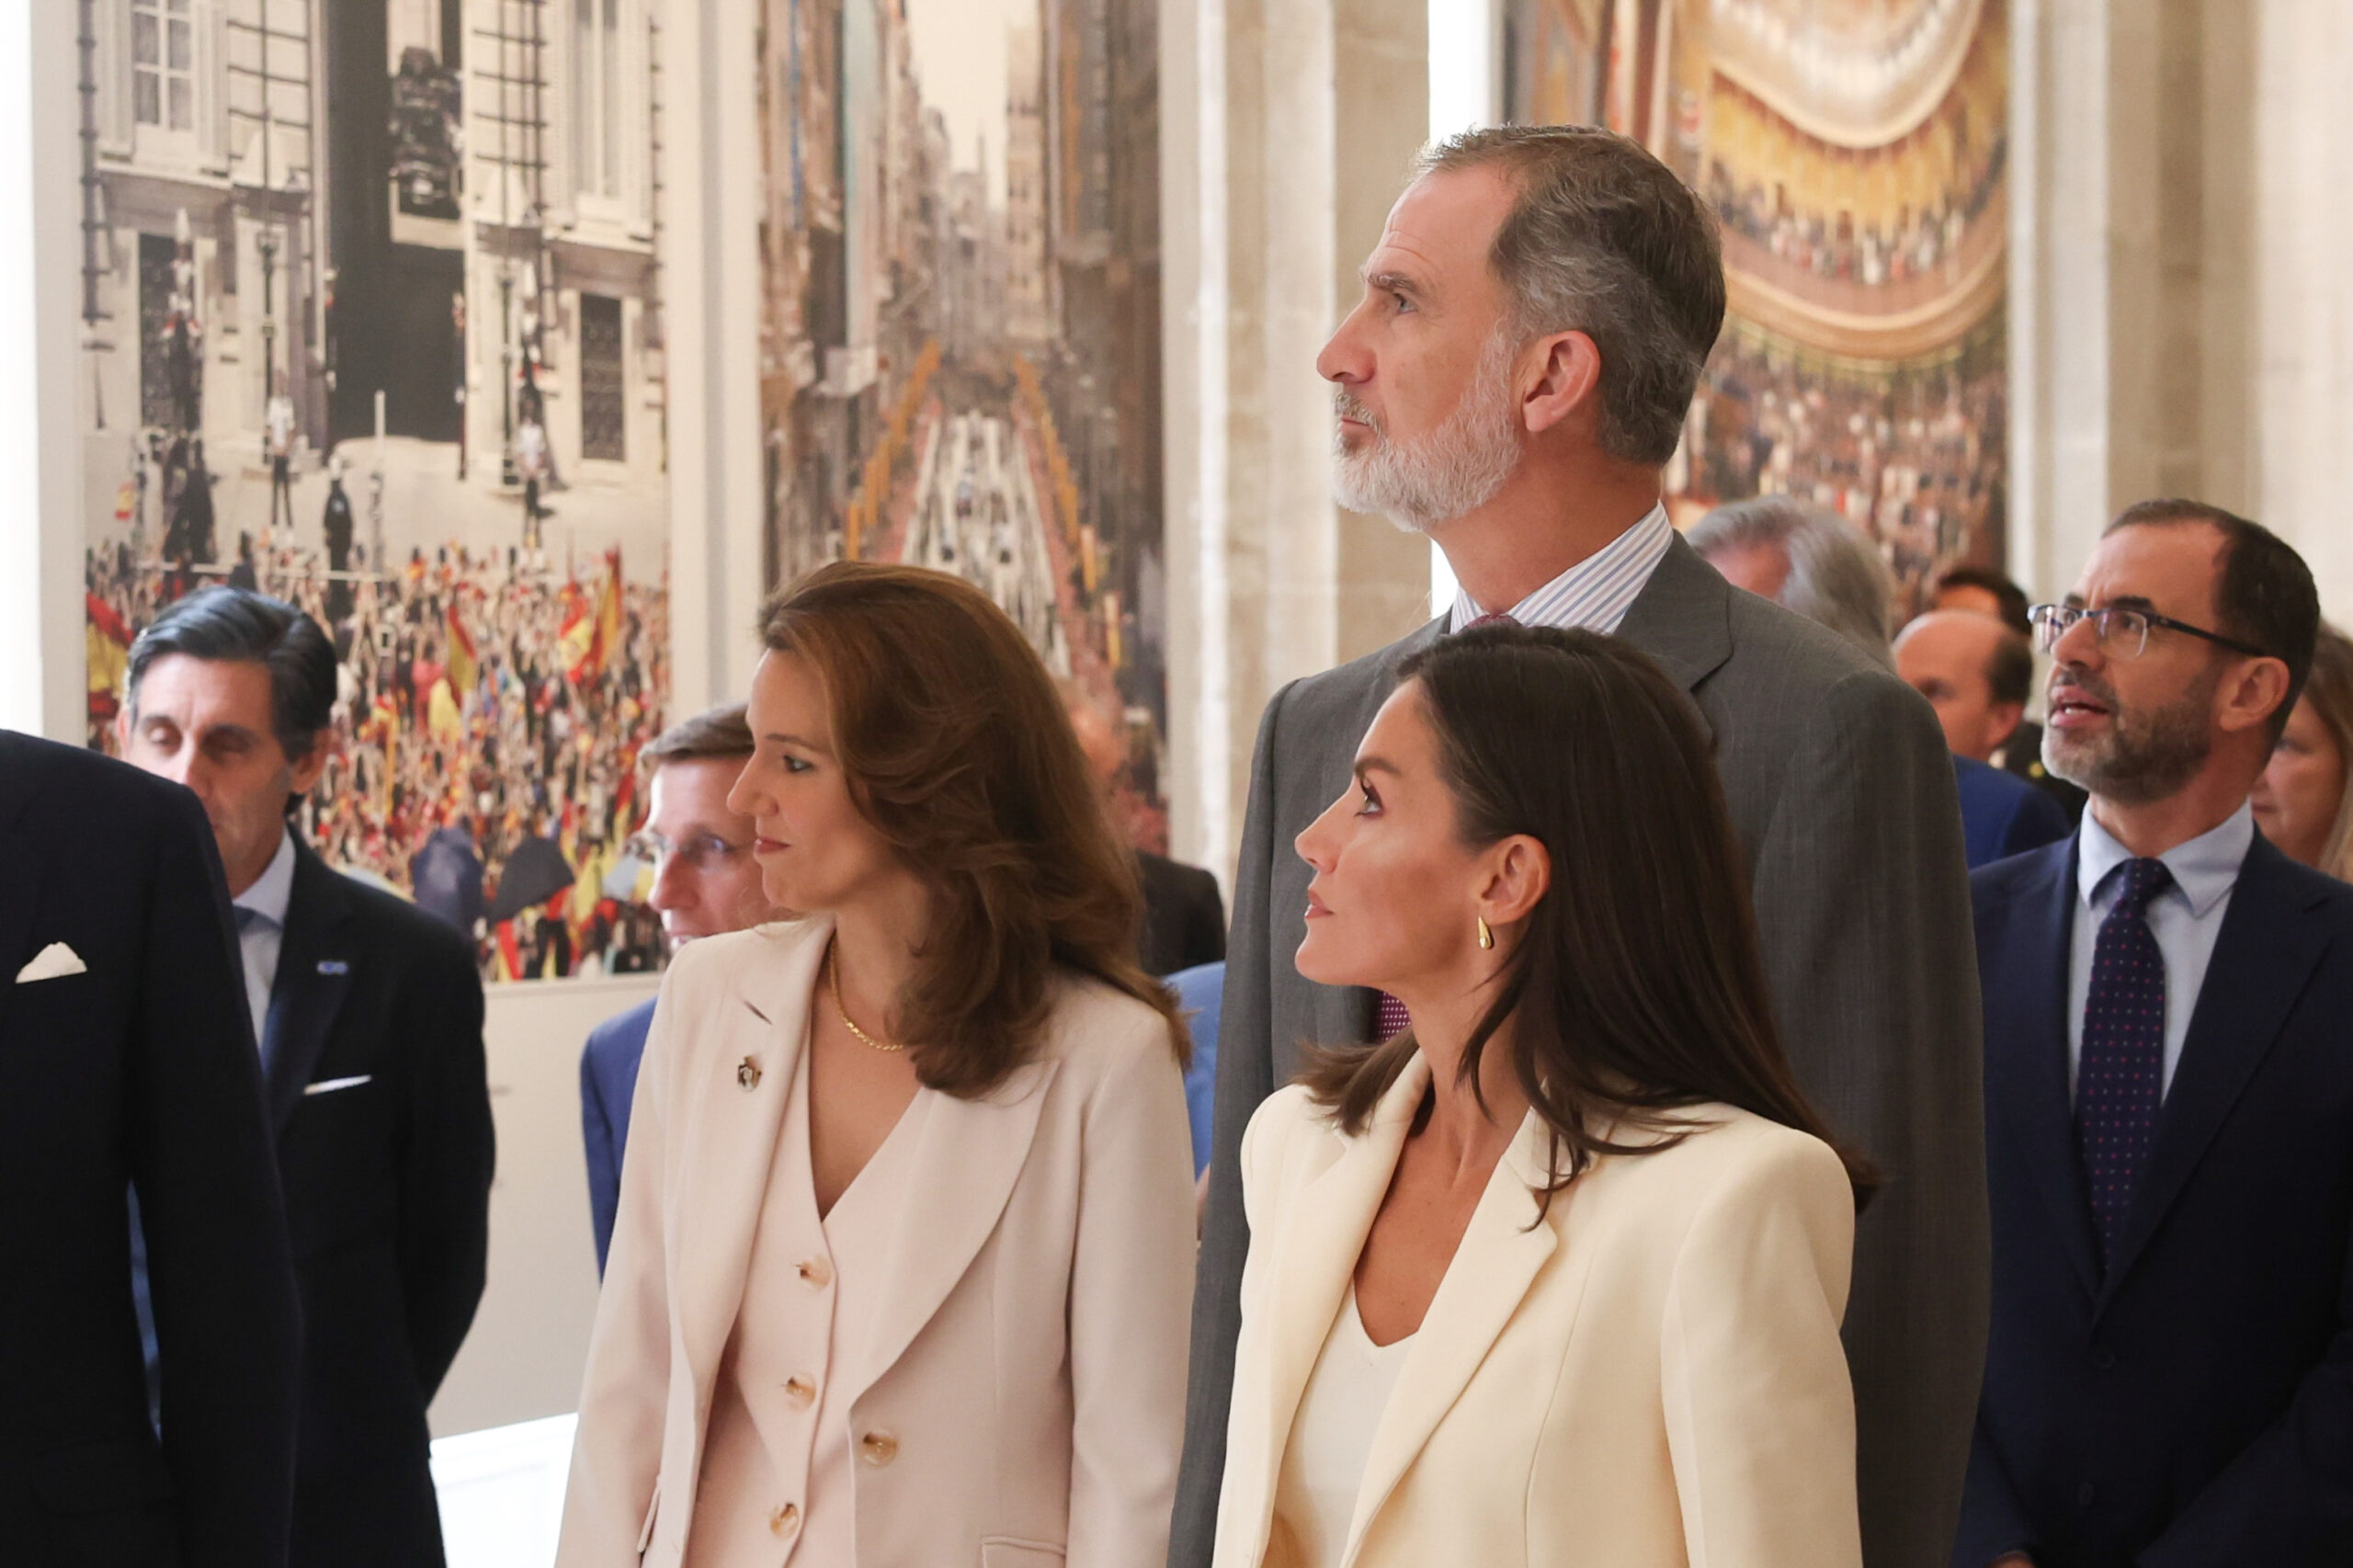 A new exhibition ends stunning celebrations for King Felipe’s milestone anniversary